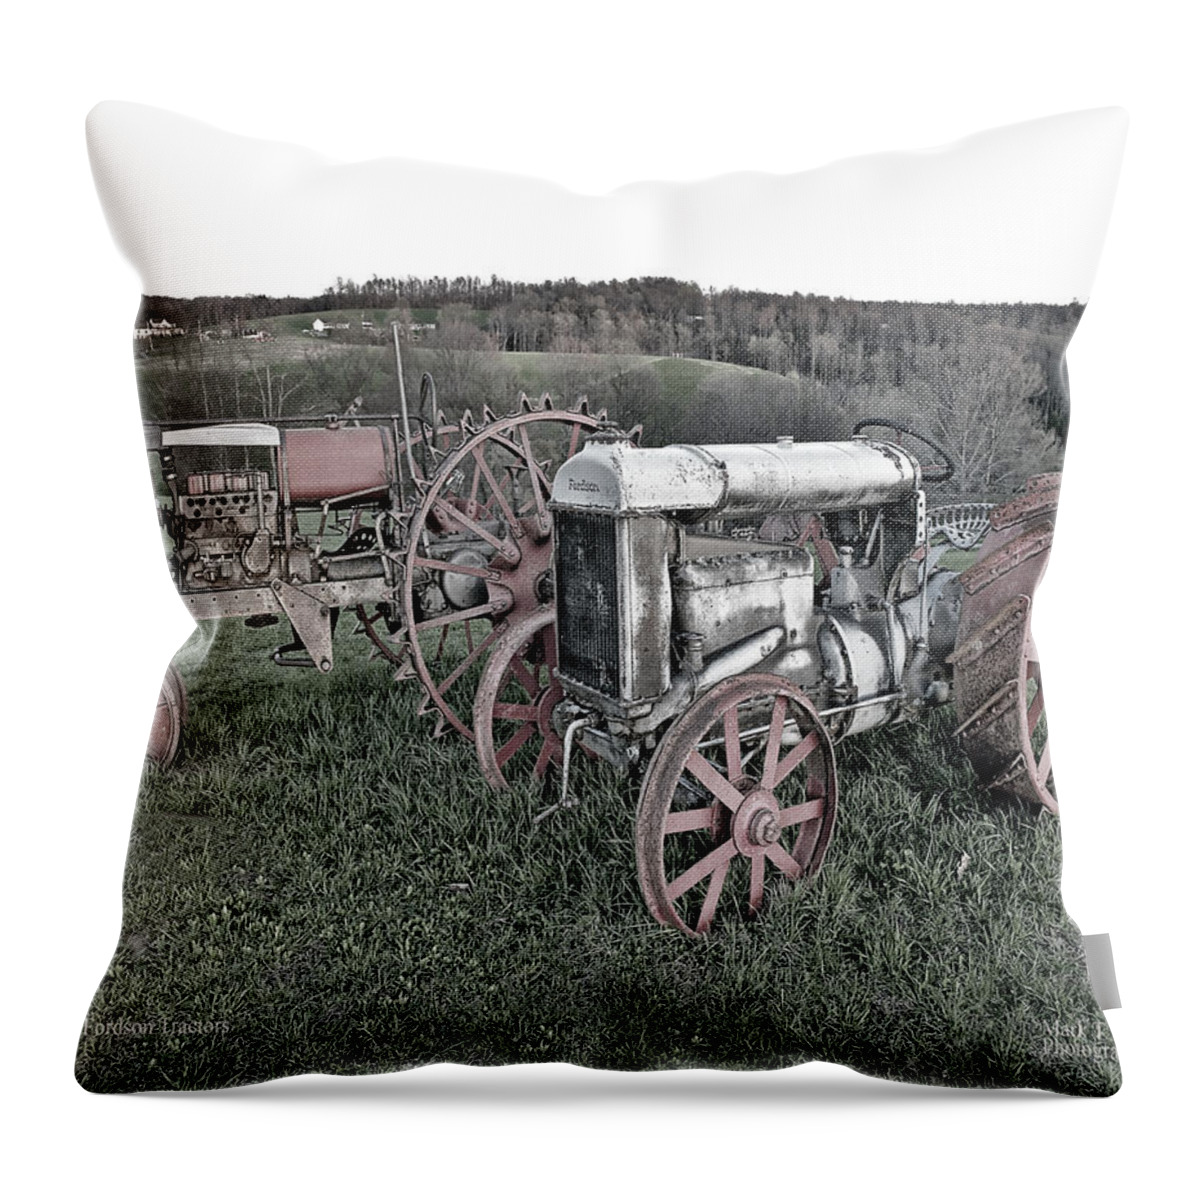 Old Fordson Tractor Throw Pillow featuring the photograph 1923 Fordson Tractors by Mark Allen